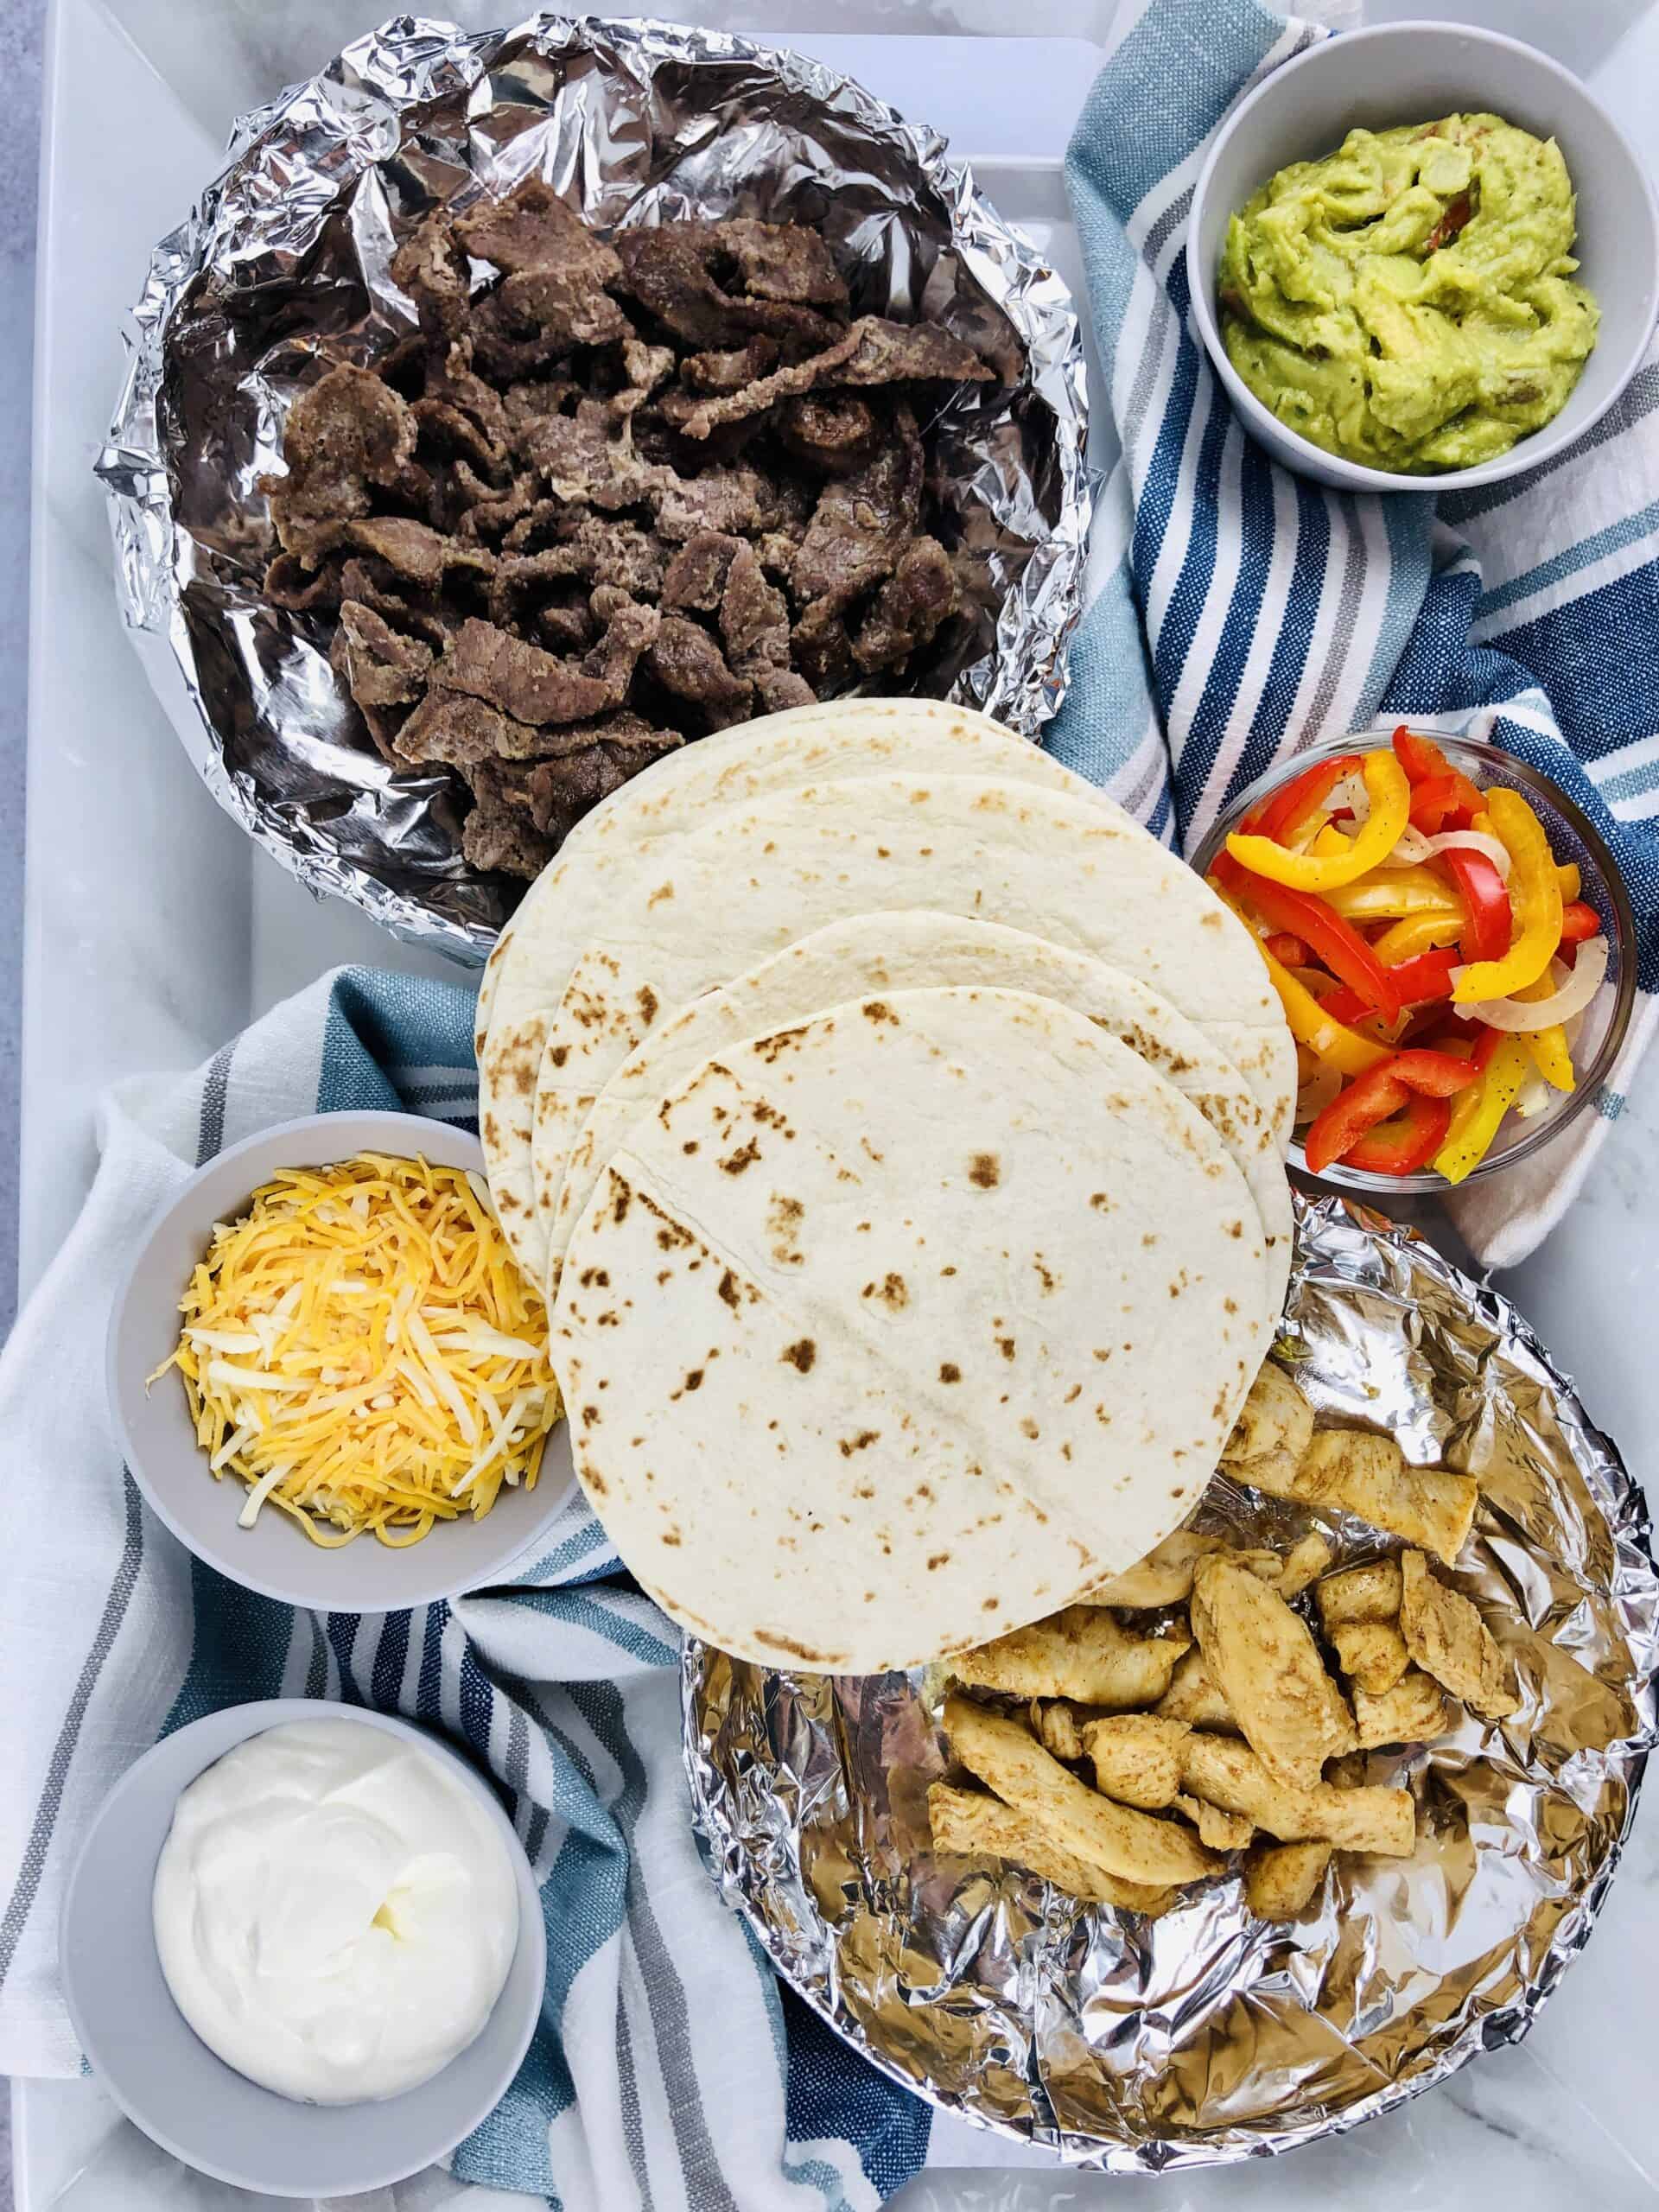 These are the easiest and best sheet pan fajitas you will ever try. They're perfect for taco Tuesday, Cinco de Mayo or any night you want a delicious meal.